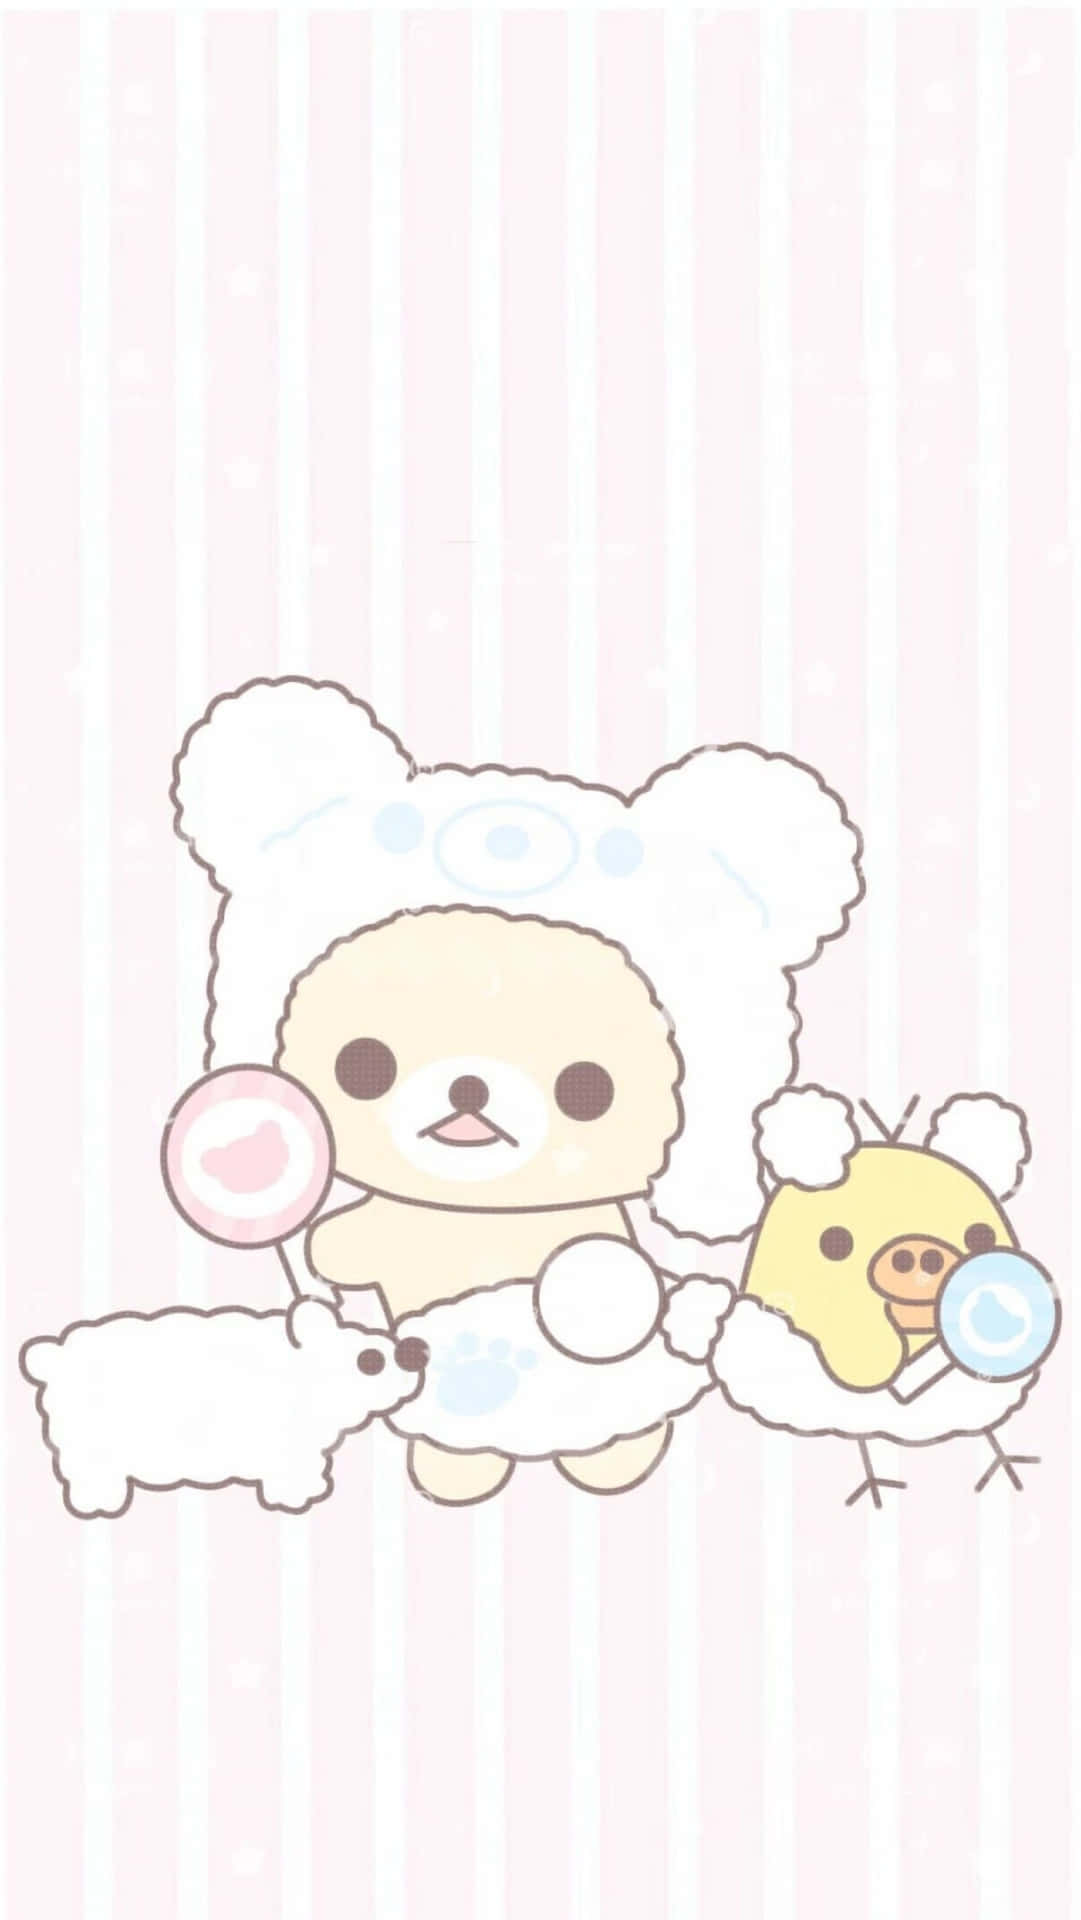 Download Get That Last Bit of Relaxation with Cute Rilakkuma Wallpaper ...